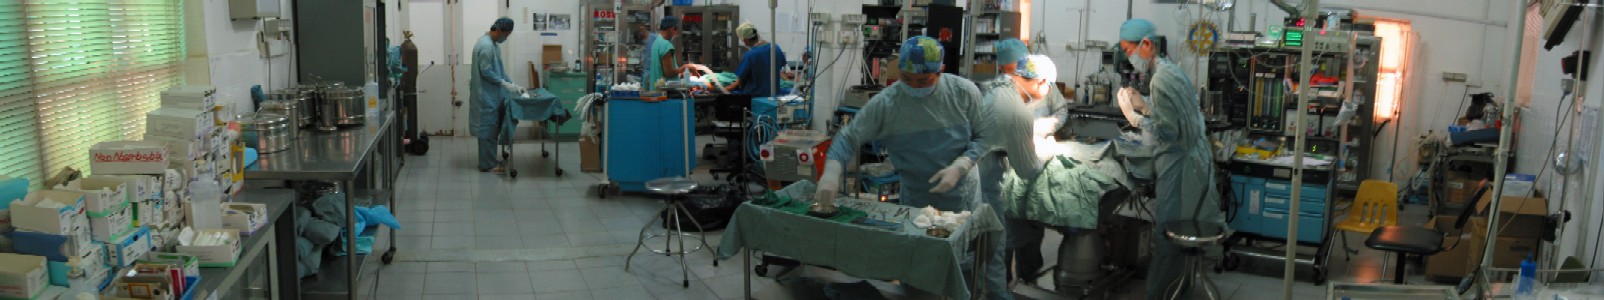 CSC Operating Room